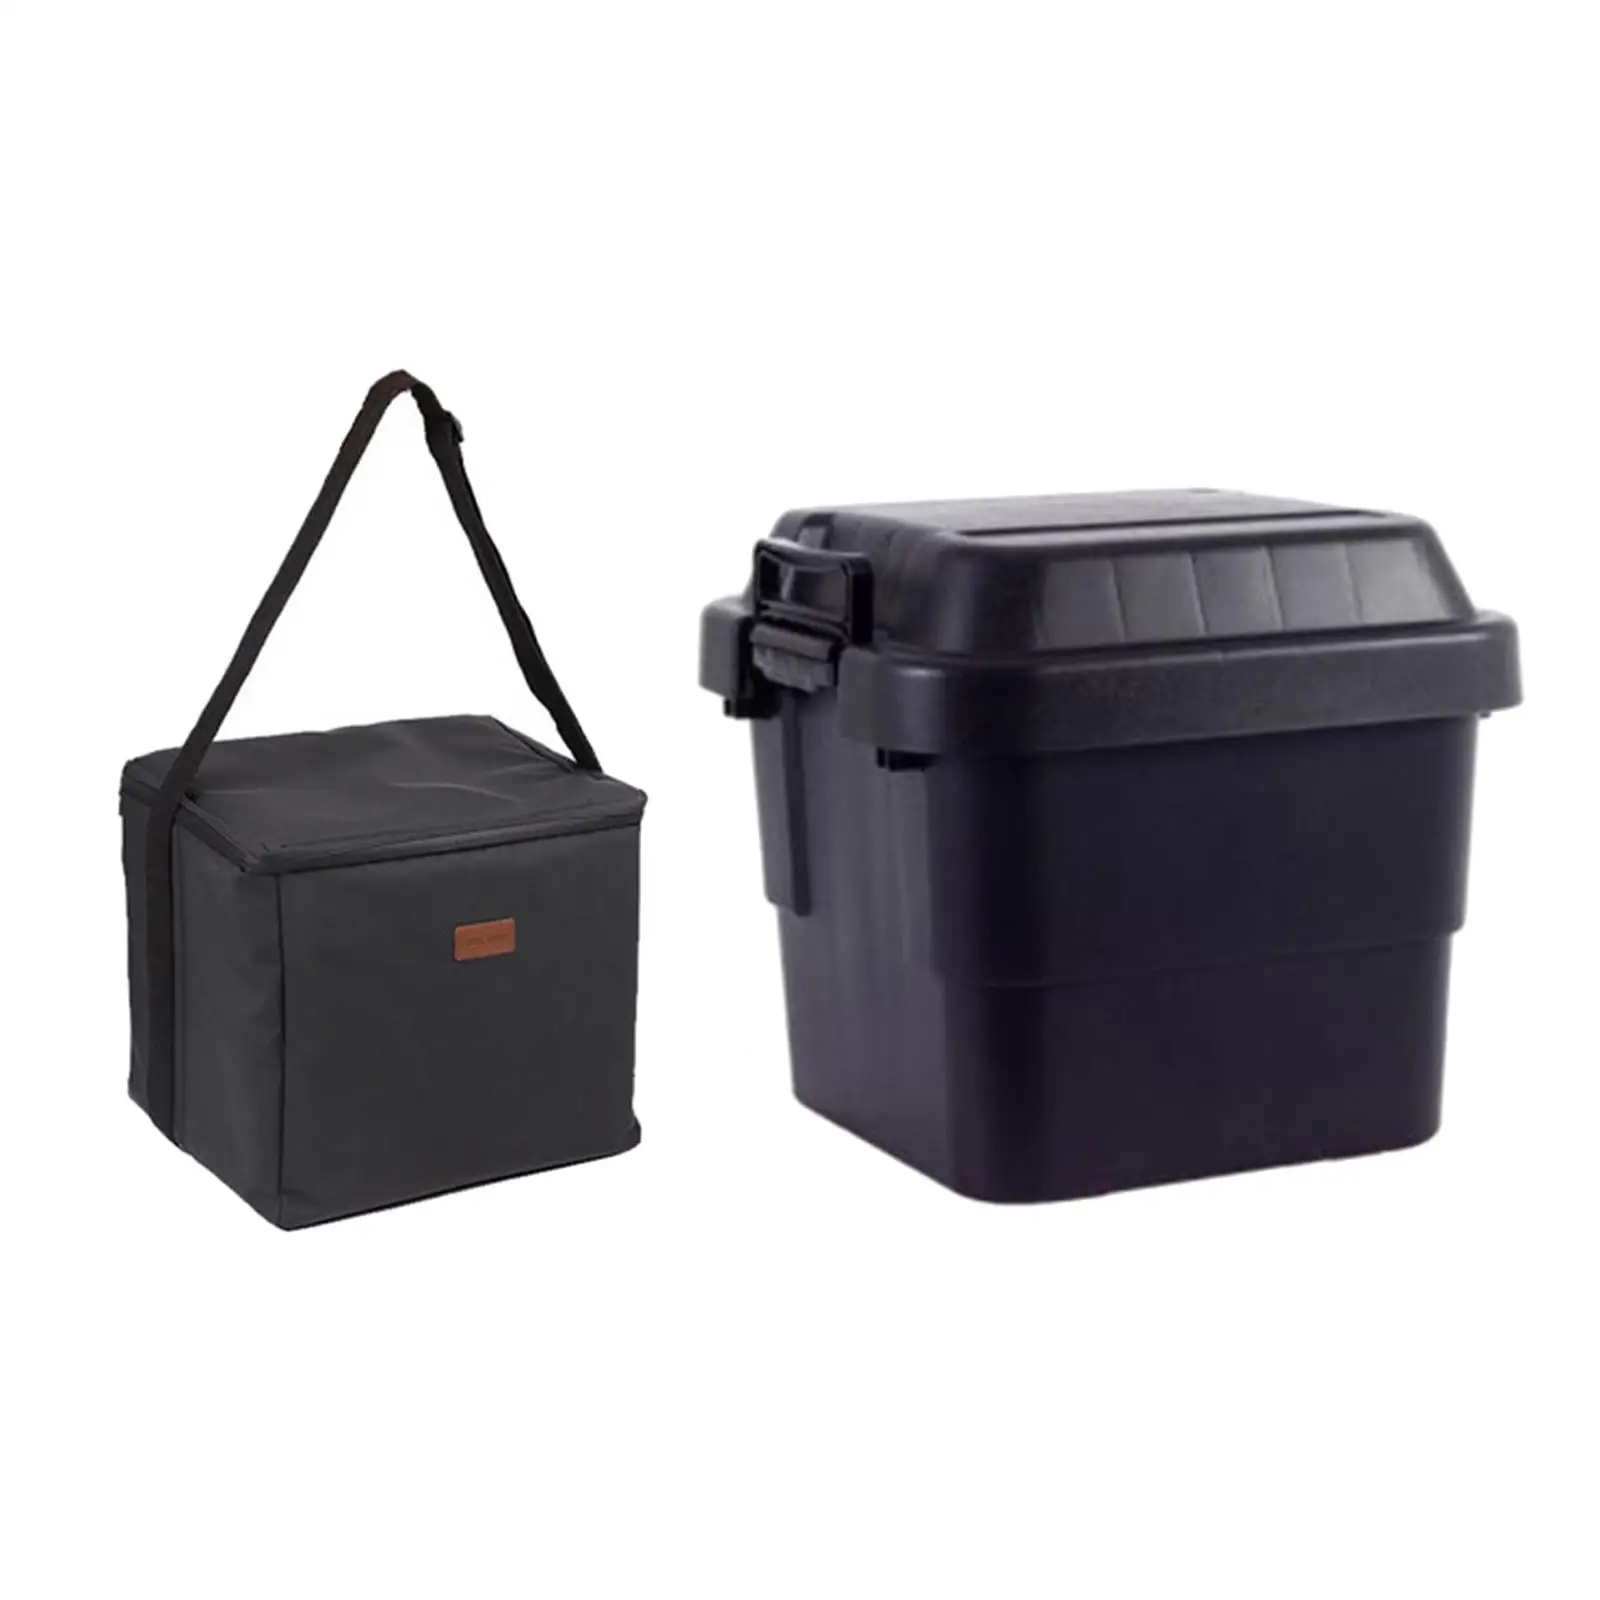 Insulated Thermal Boxes Outdoor Camping Outdoor Activities Picnic Cooler Bag